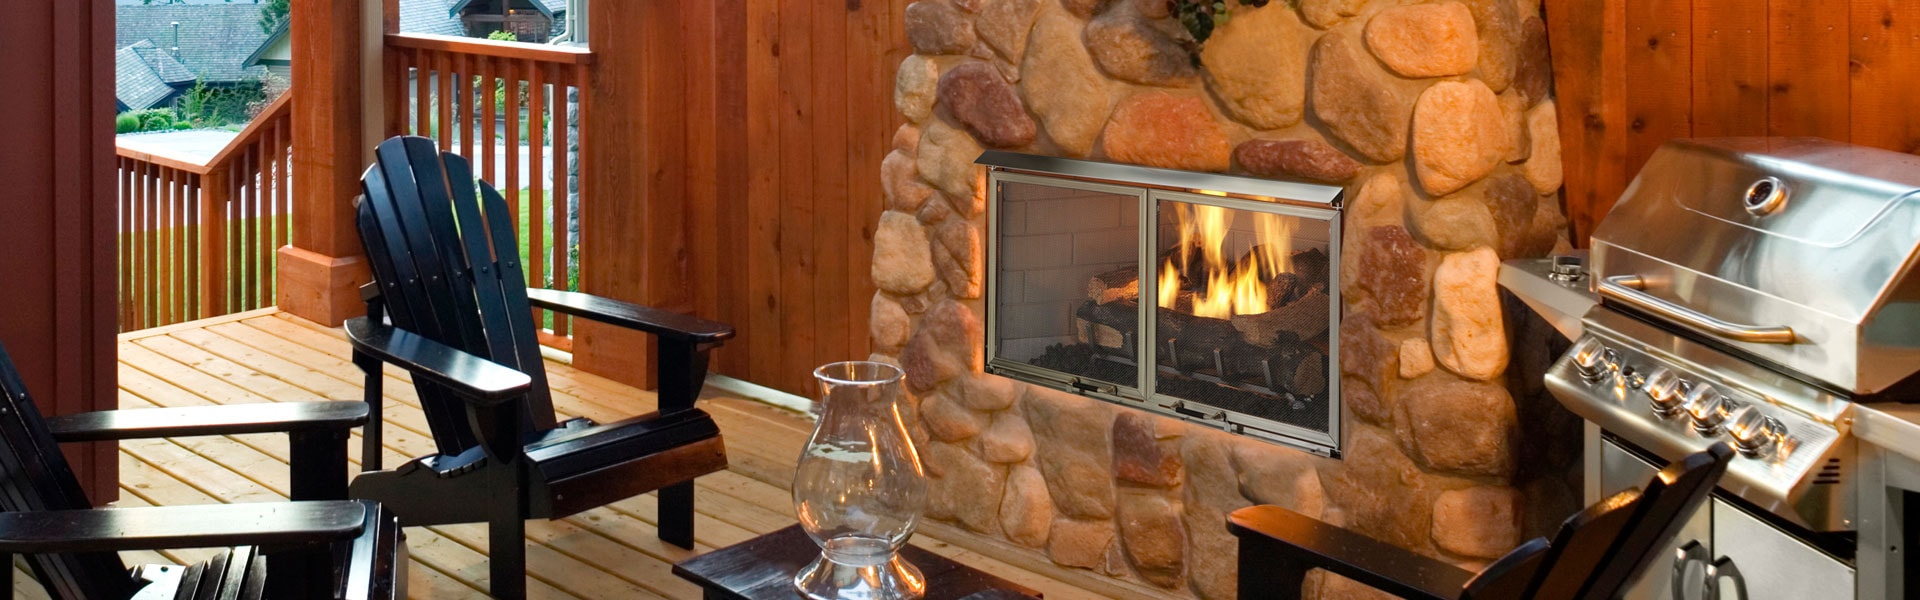 How to Clean Fireplace Glass Doors Fresh Outdoor Lifestyles Villa Gas Fireplace